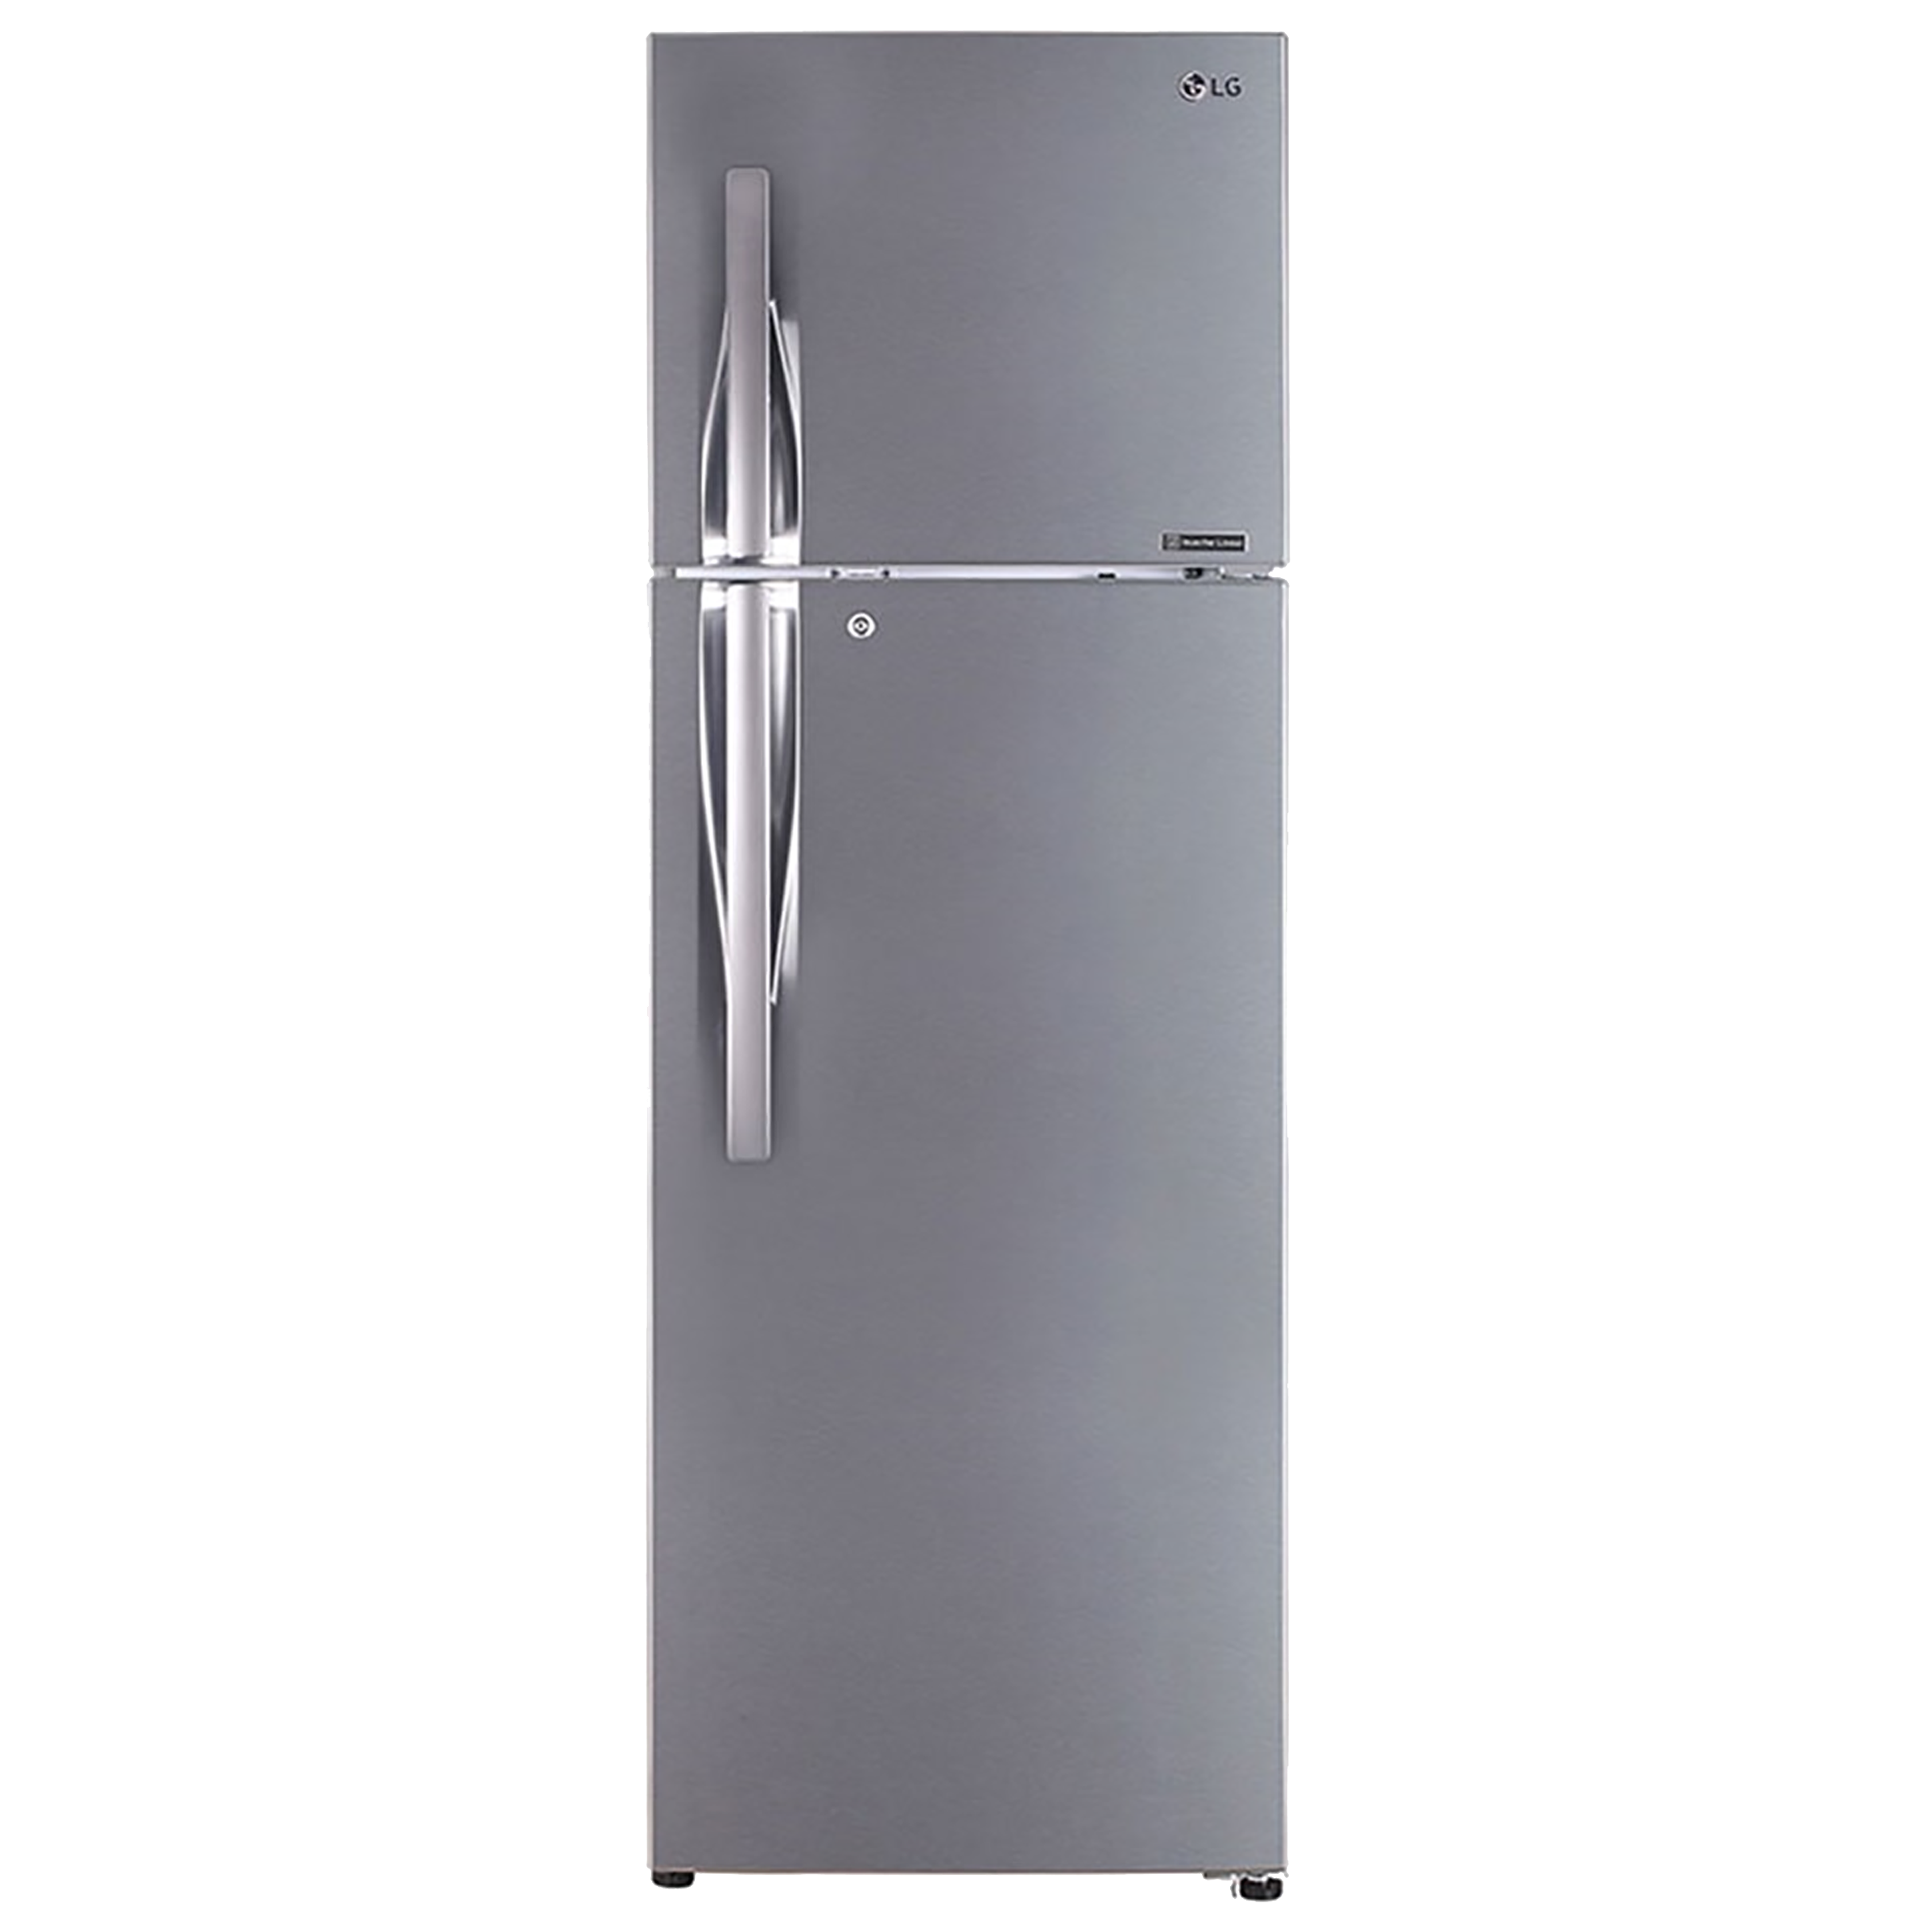 LG - lg 360 Litres 3 Star Frost Free Inverter Double Door Refrigerator (Convertible Plus, GL-T402JPZN.EPZZEBN, Shiny Steel)